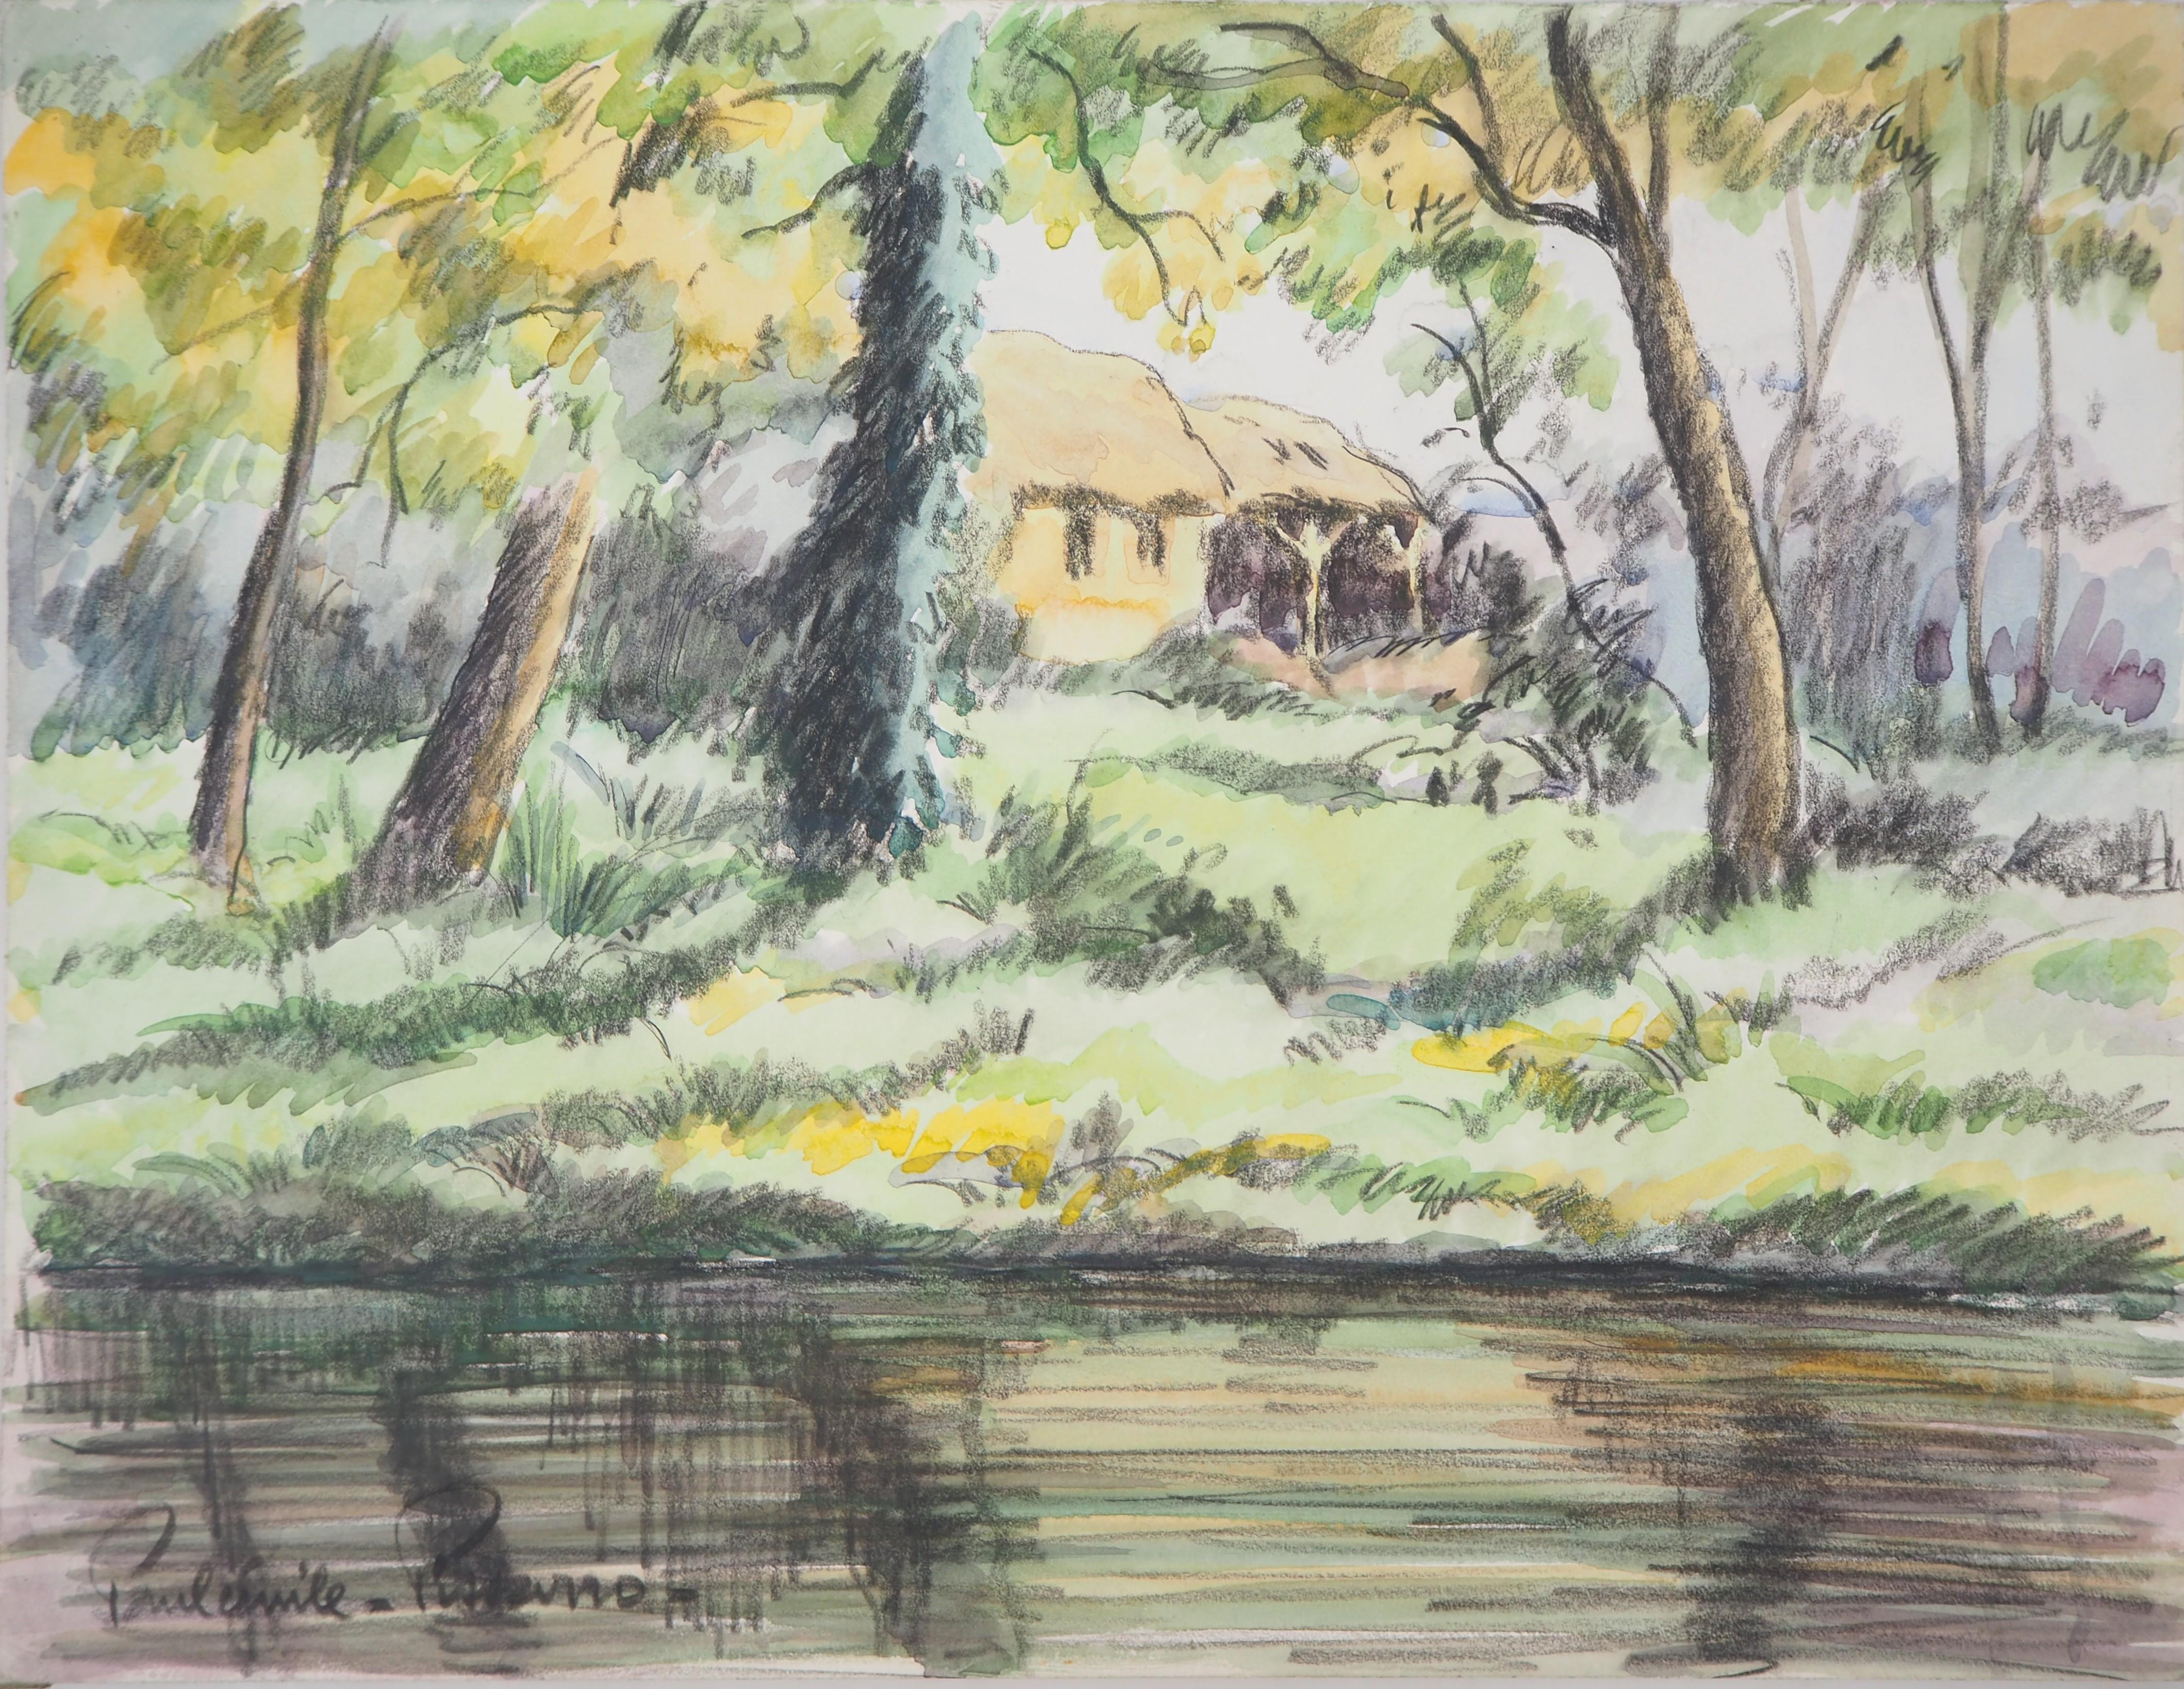 Paul Emile Pissarro Landscape Art - The Cottage in the Woods - Original watercolor painting - Signed